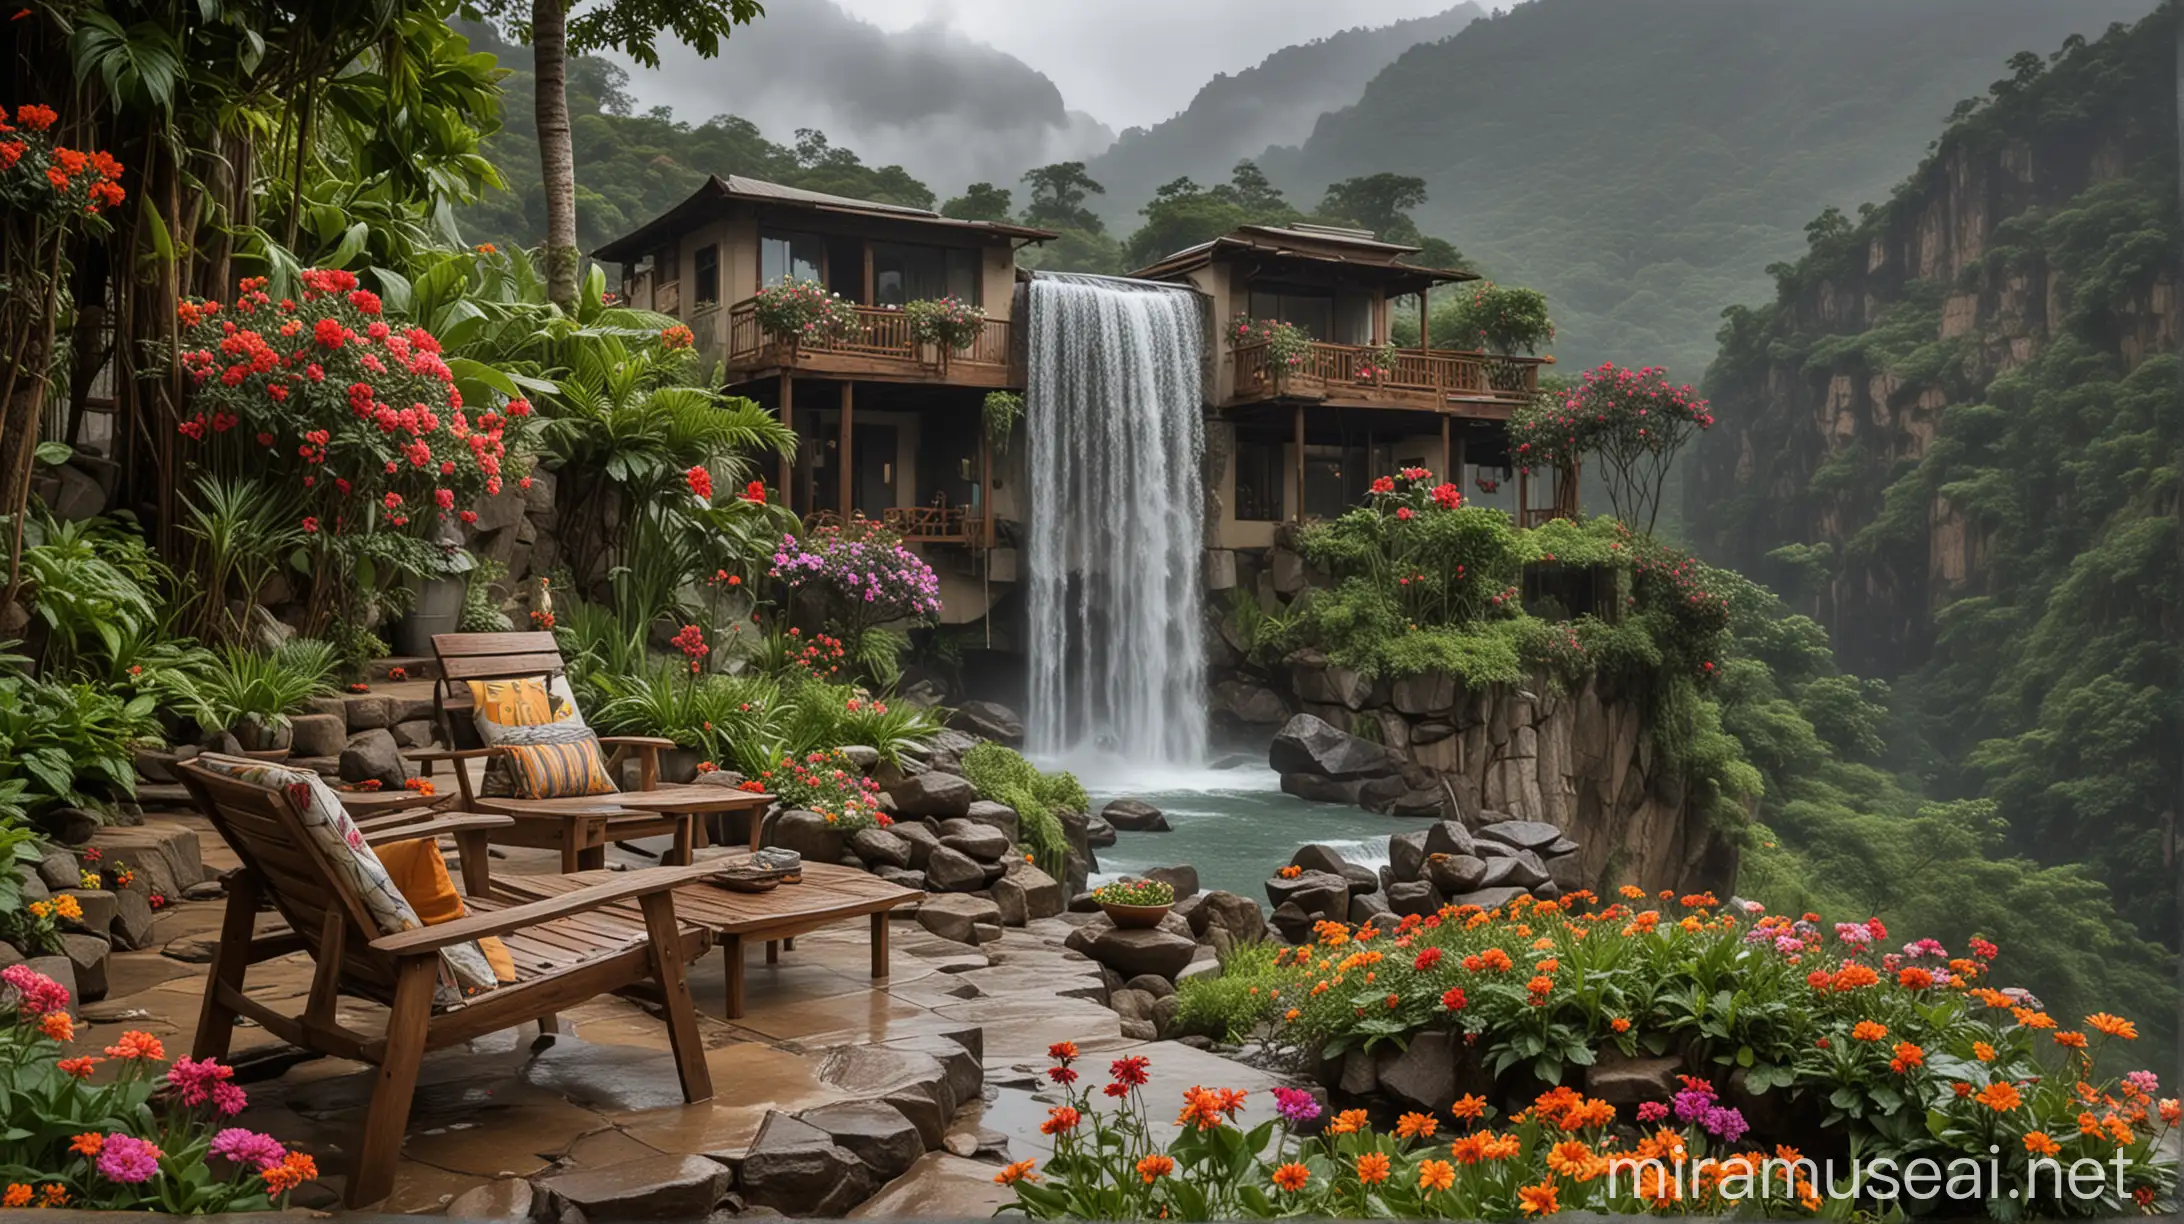 moonsoon house at mountain with flowers and waterfall and sitting chairs